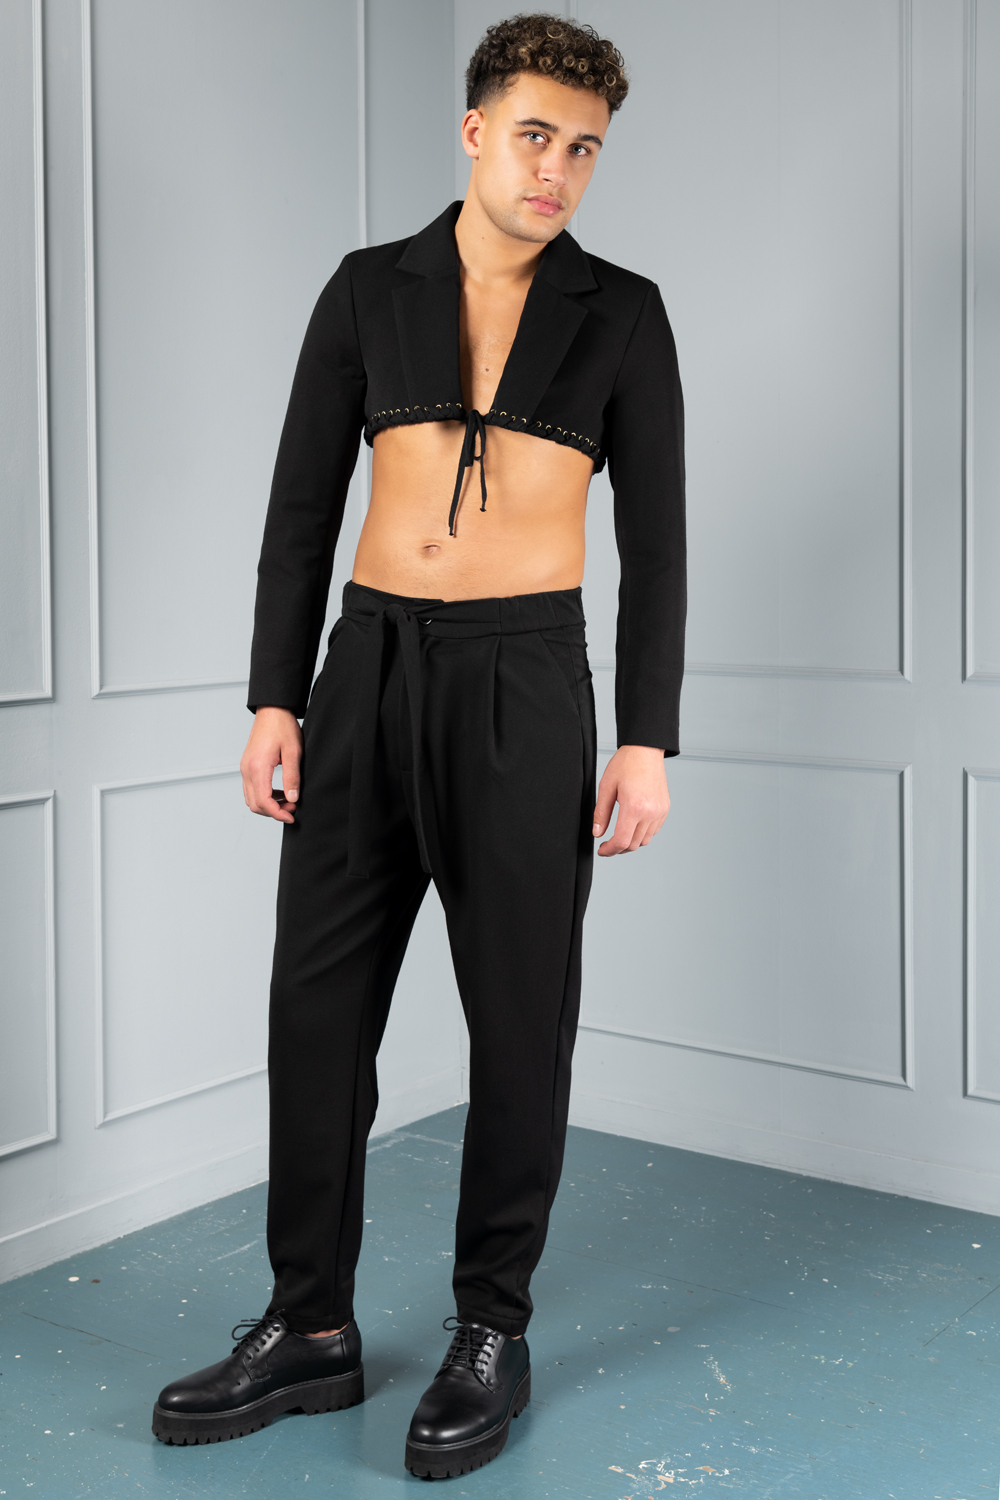 Winged side Adjuster Black Cropped Trousers